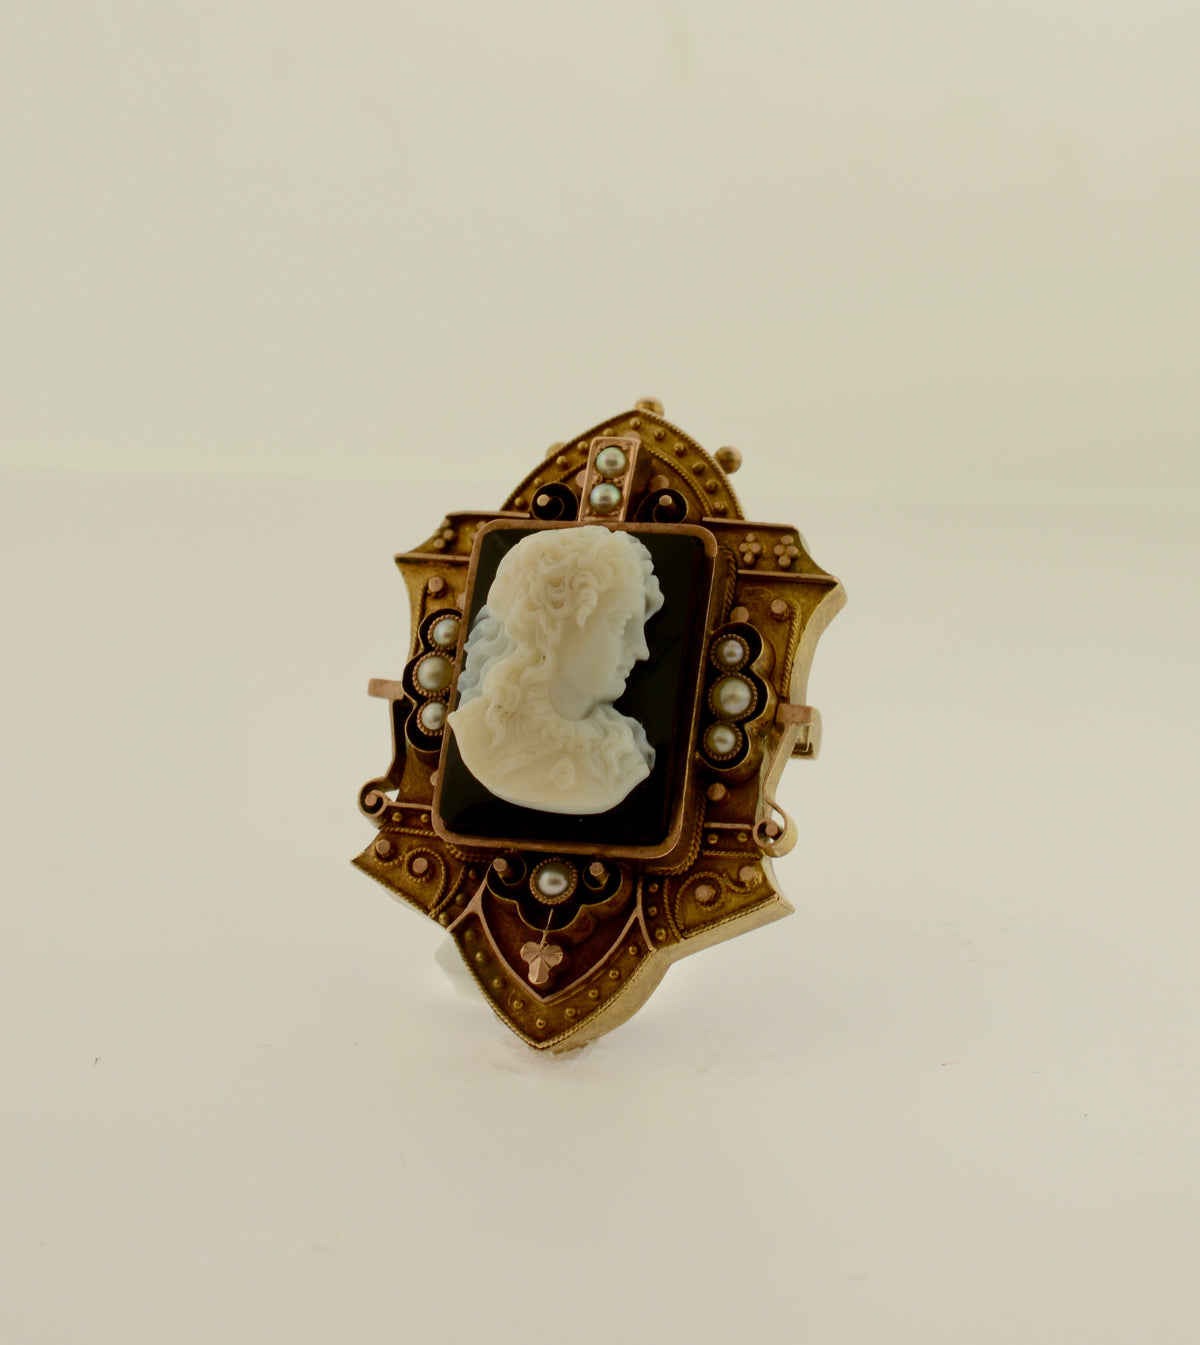 9K Antique Agate Cameo Brooch/Pendant with Seed Pearls